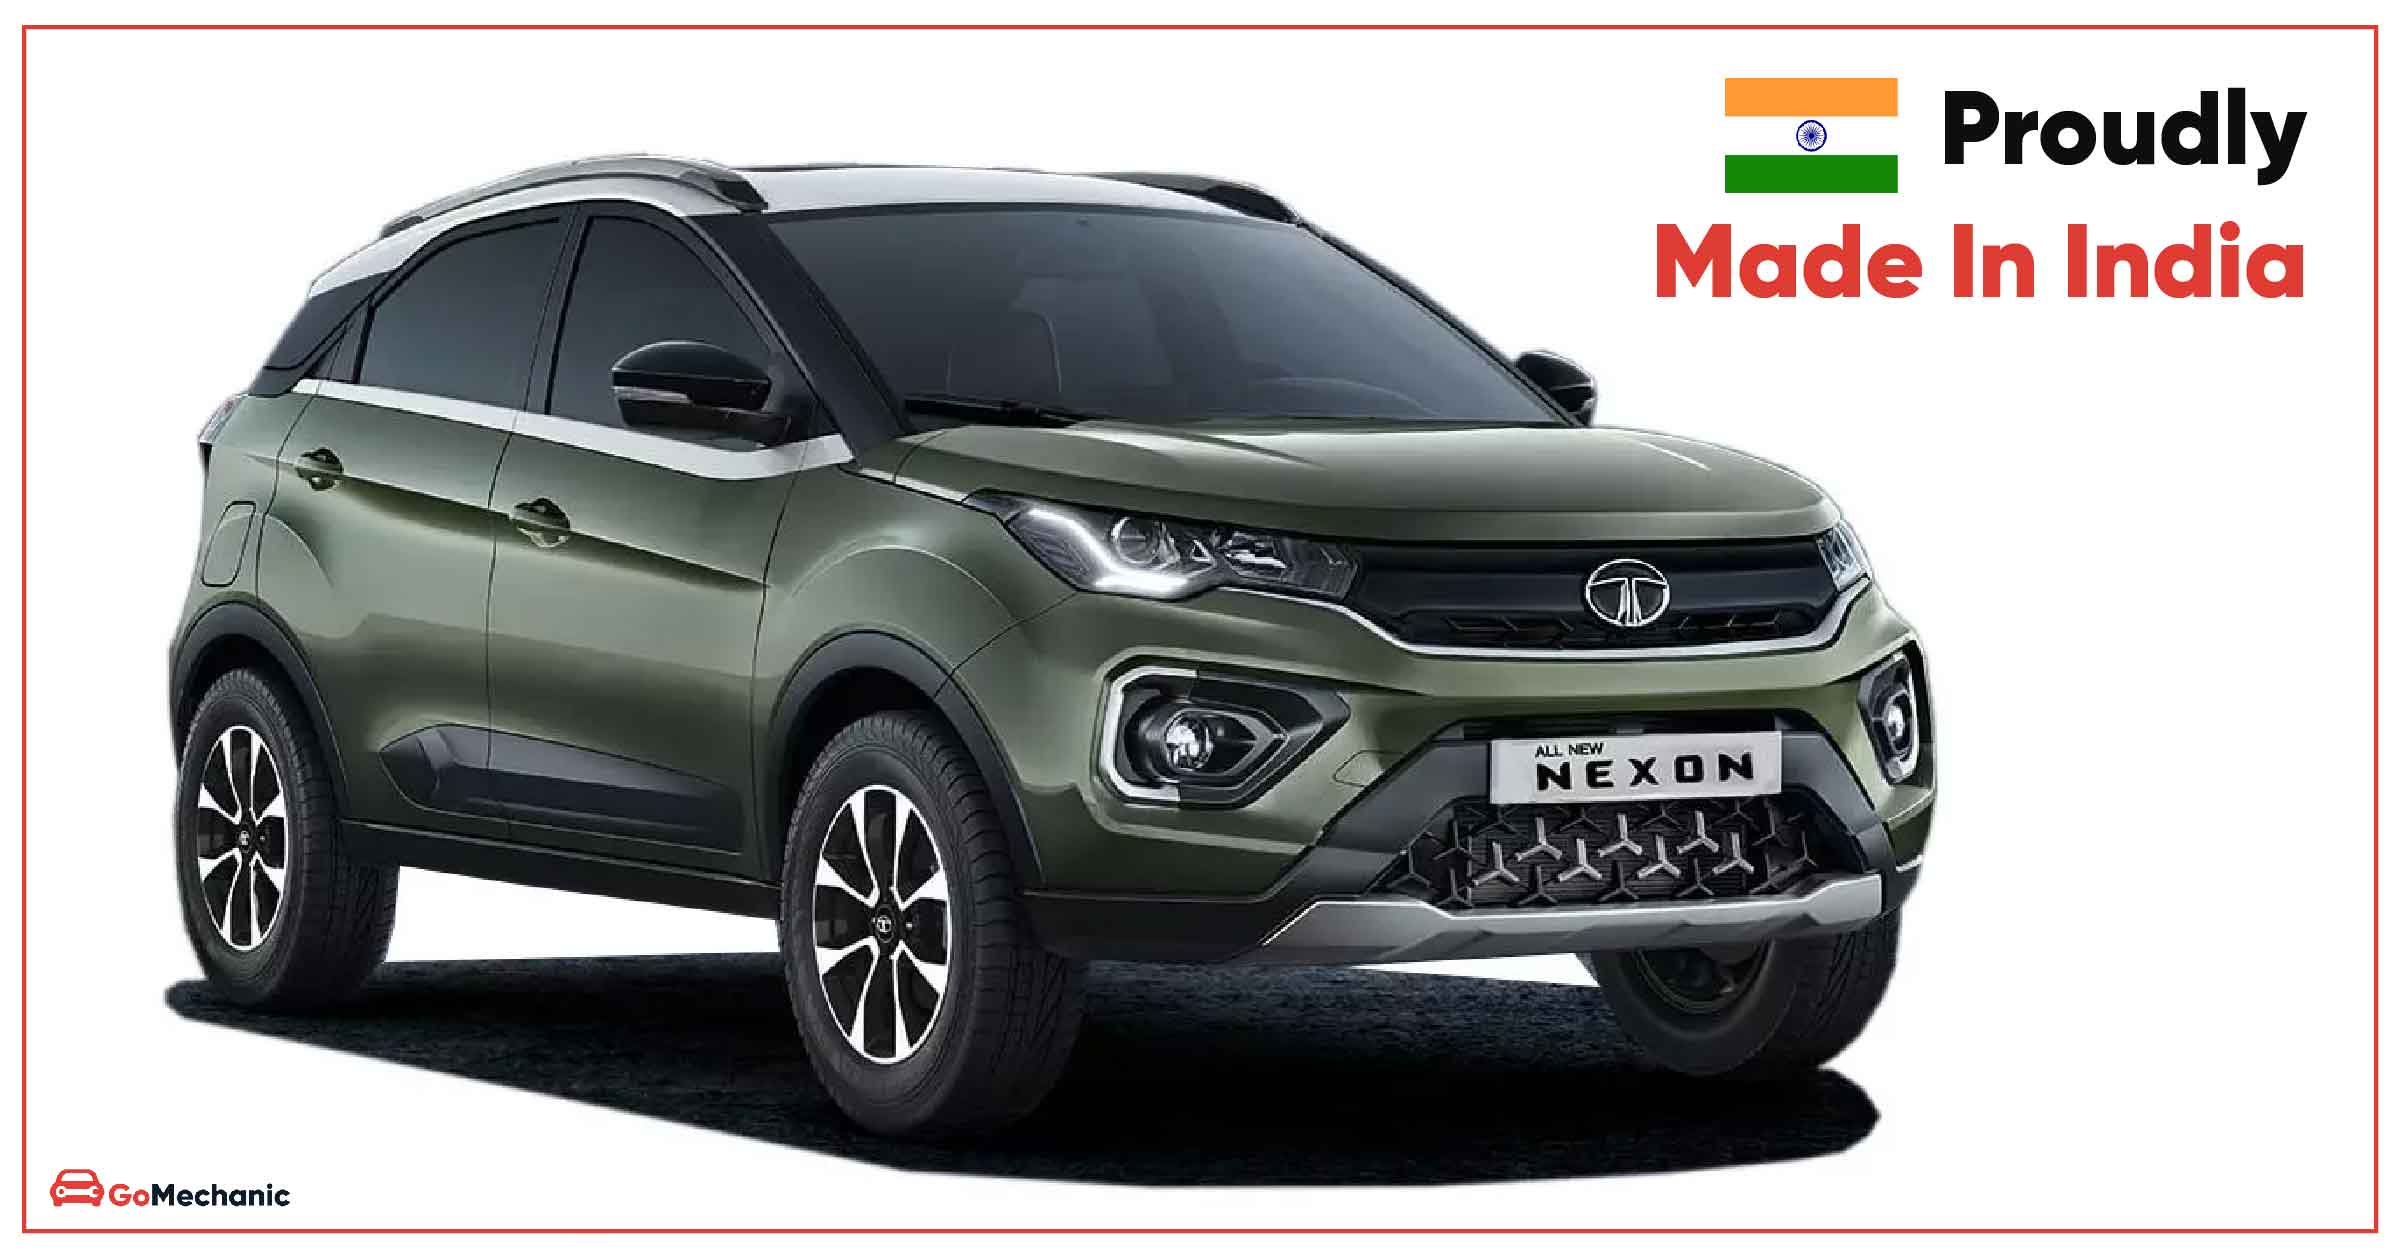 10 Made in India Cars that we are proud of